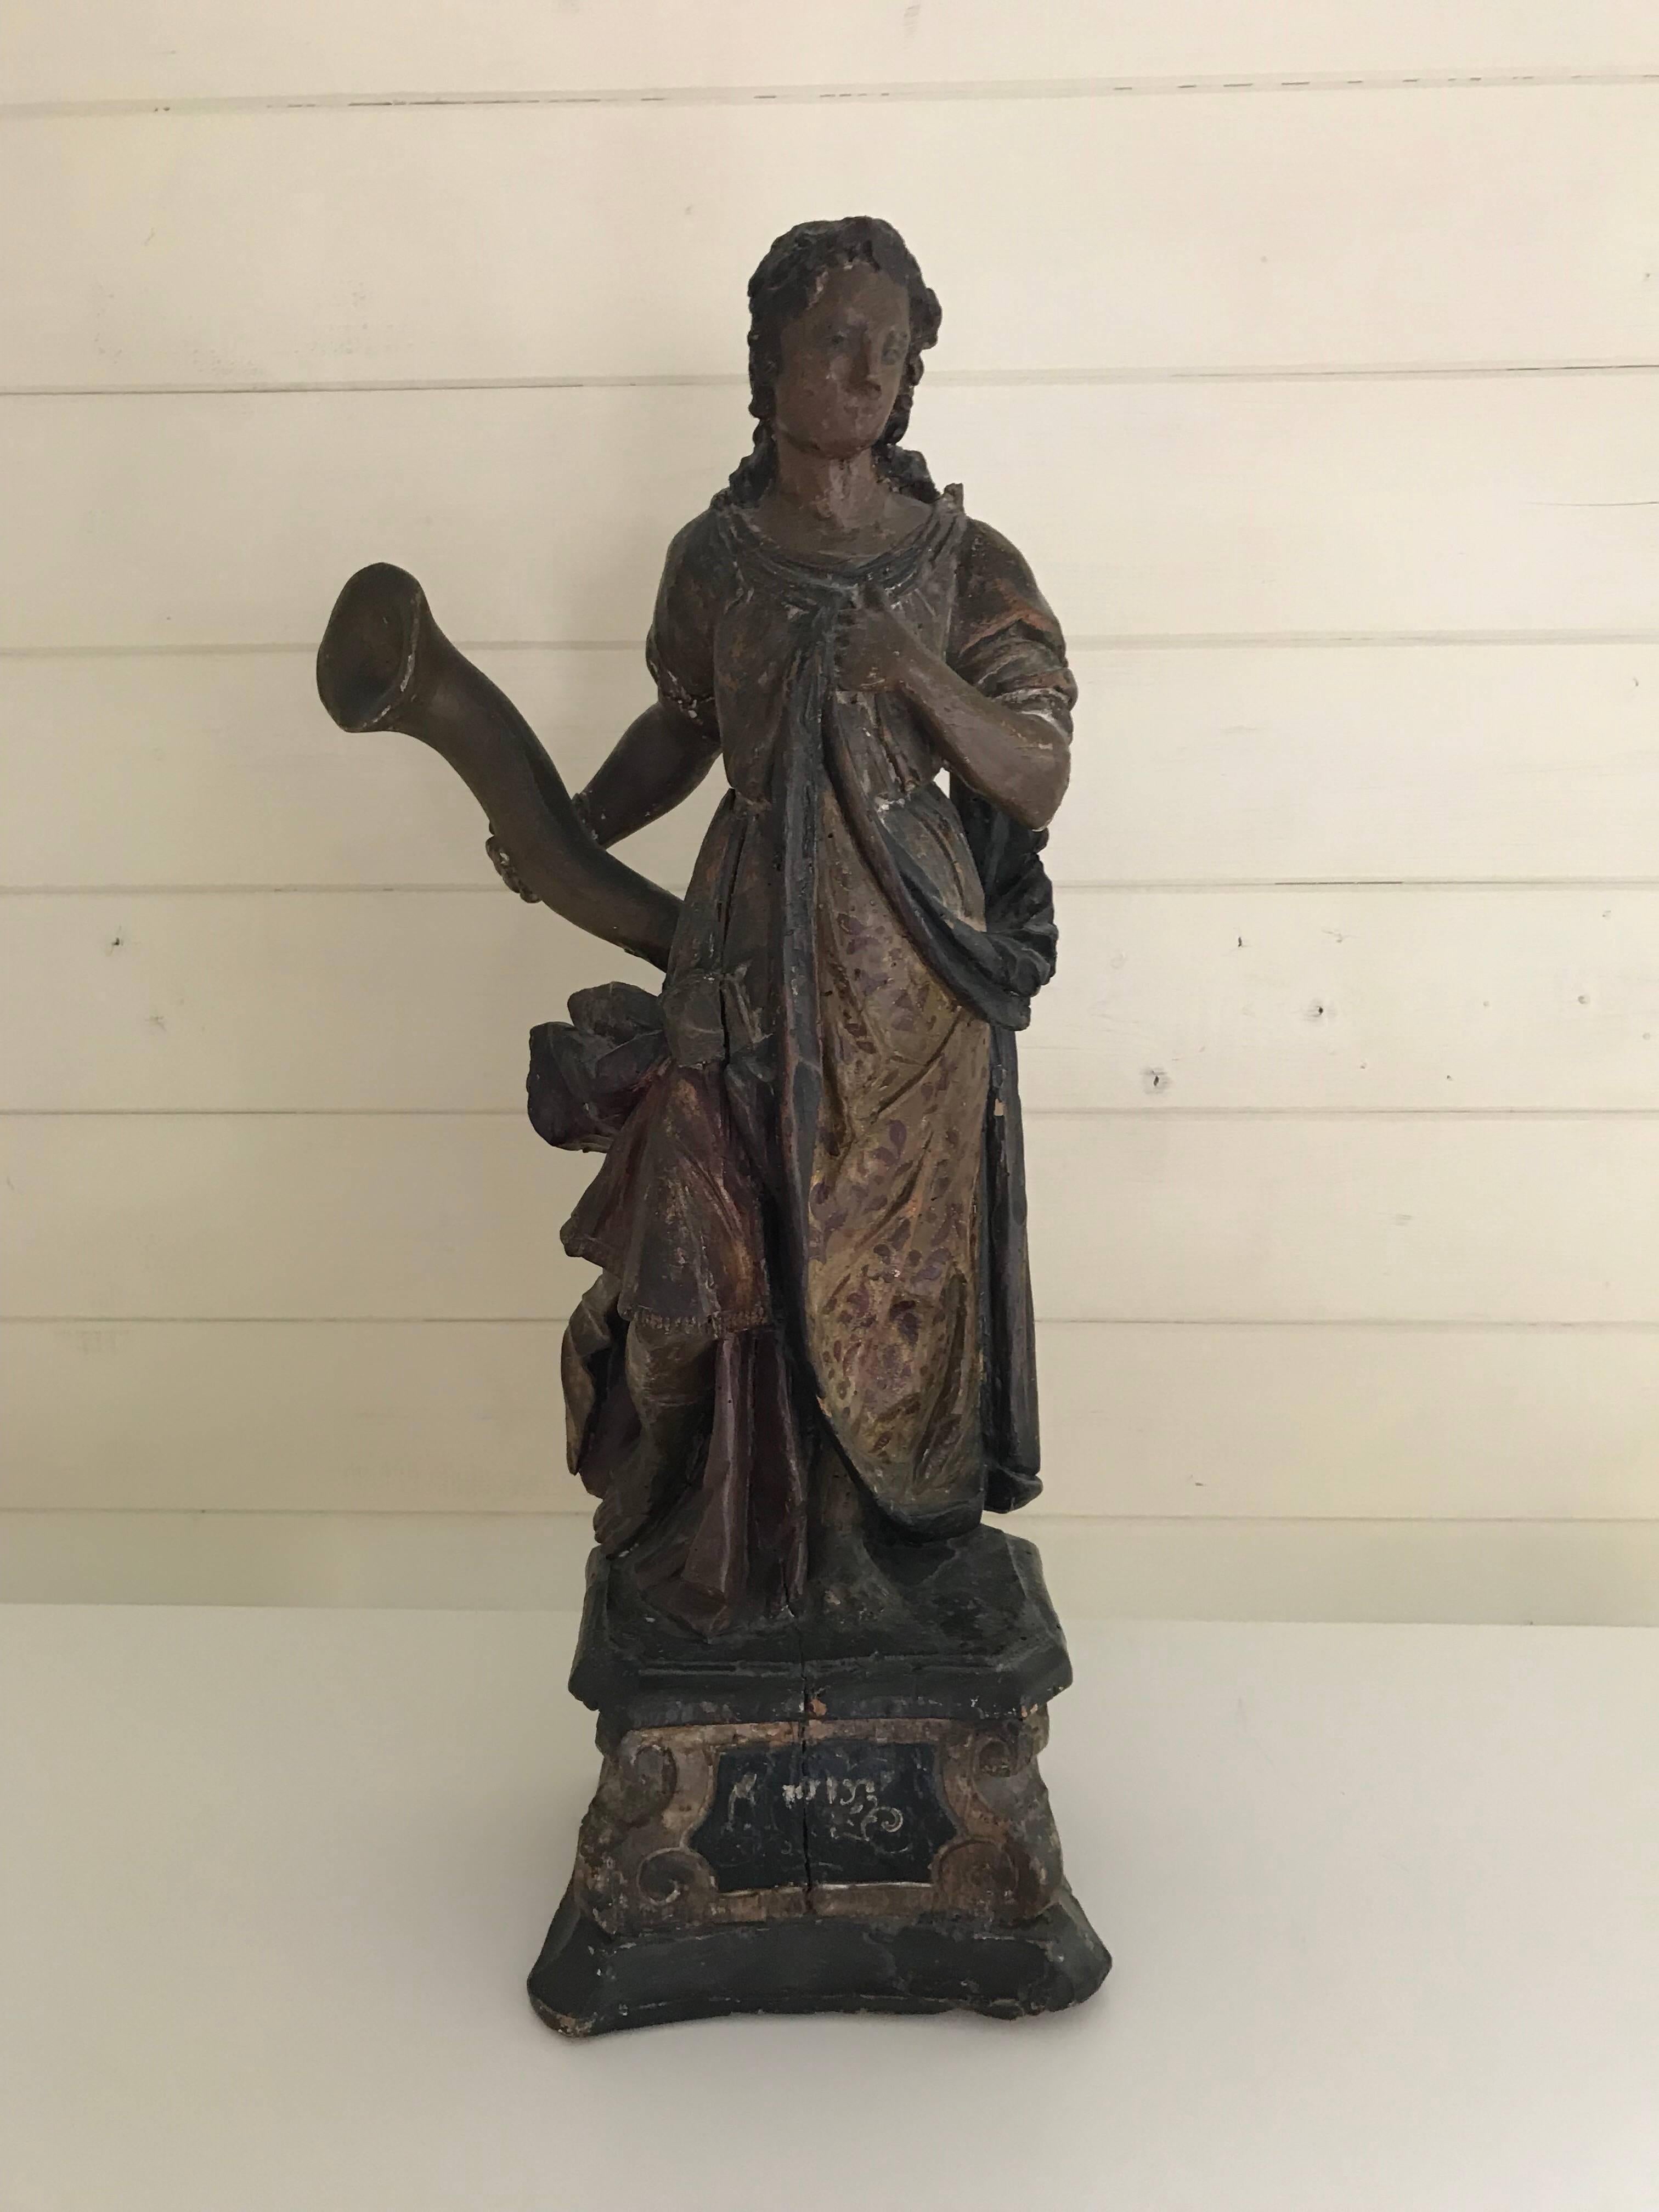 A large polychrome wooden statue of a Goddess holding the Corn of Abundance. Possibly Northern European or Italian. Traces of paint still visible. A wonderful example of Baroque sculpture.